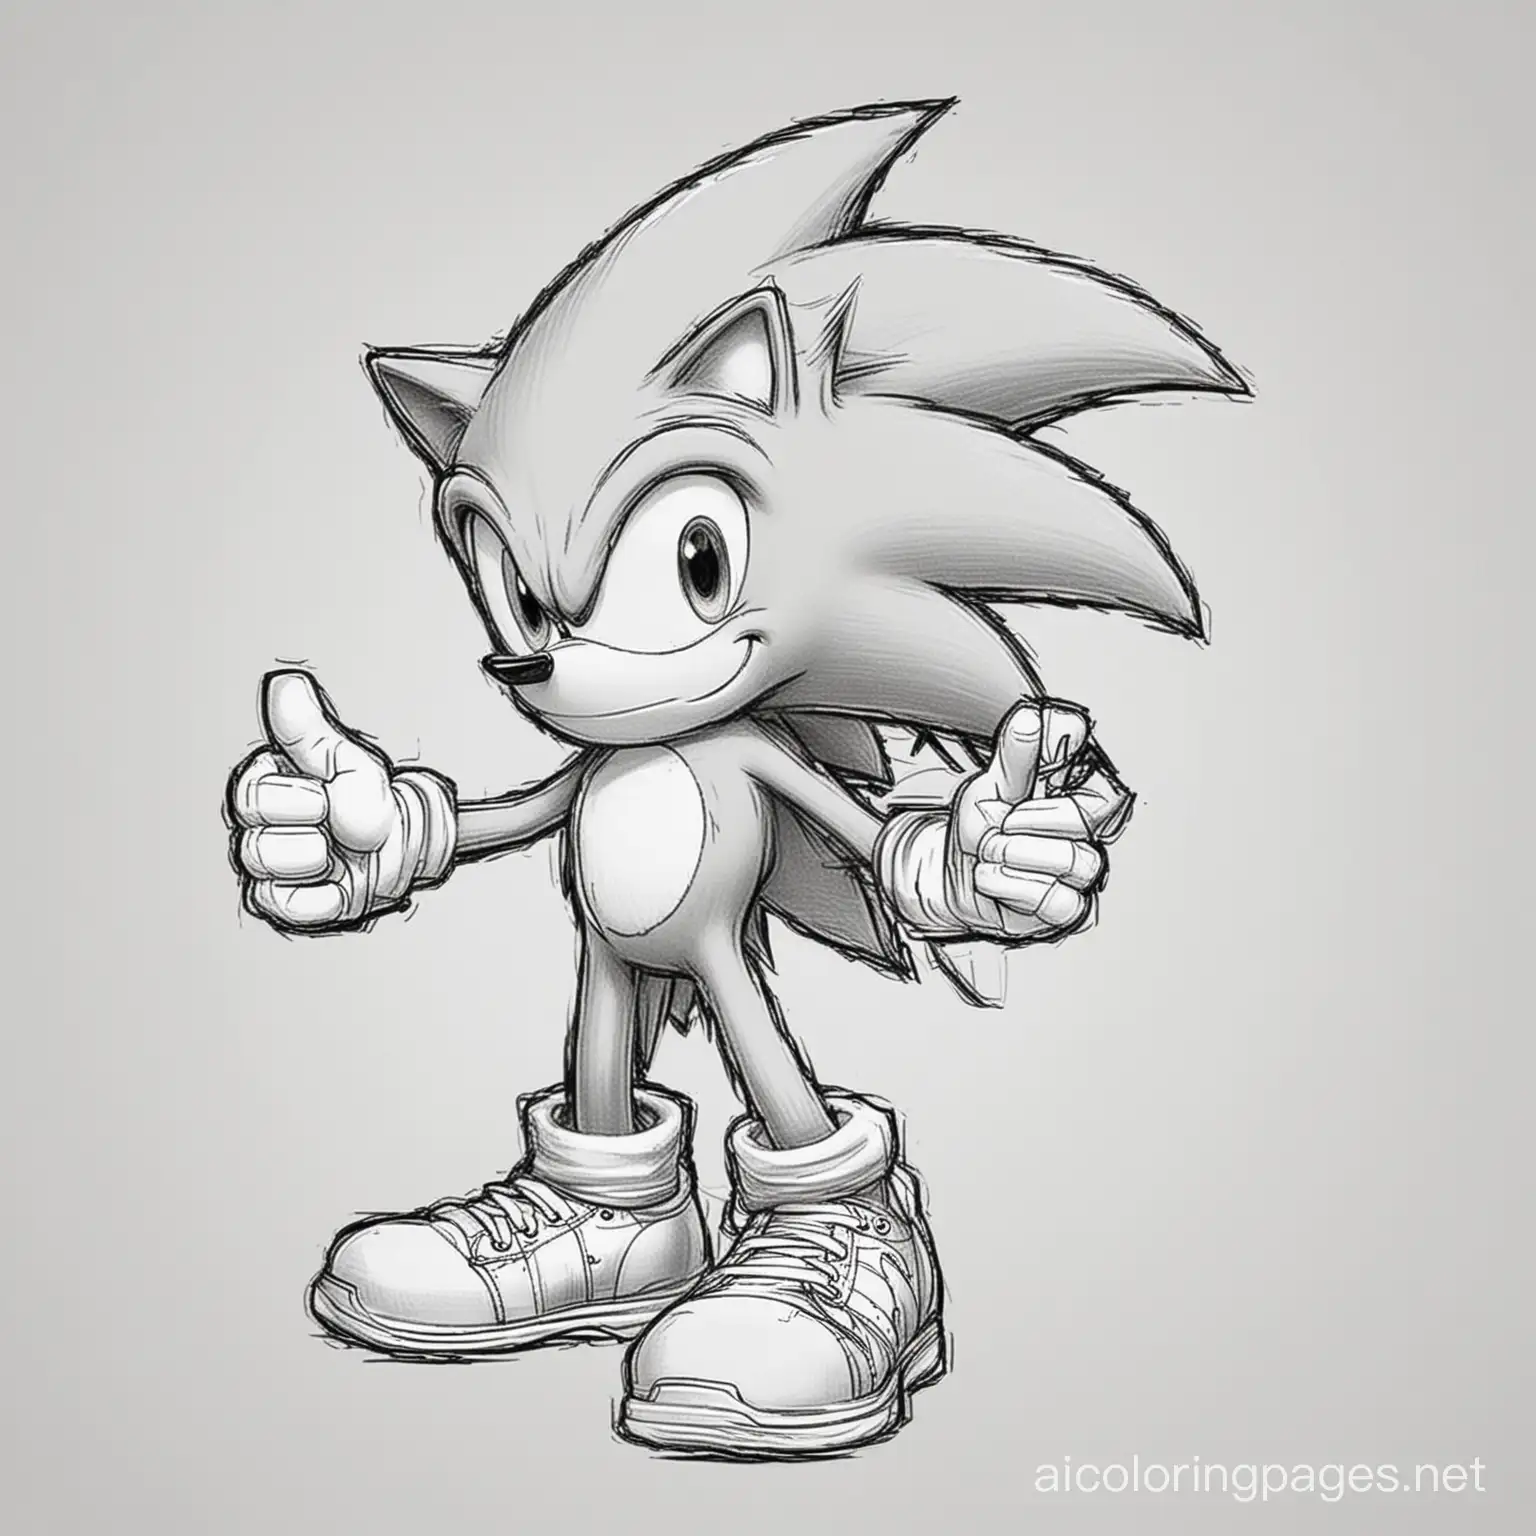 Sonic, Coloring Page, black and white, line art, white background, Simplicity, Ample White Space. The background of the coloring page is plain white to make it easy for young children to color within the lines. The outlines of all the subjects are easy to distinguish, making it simple for kids to color without too much difficulty